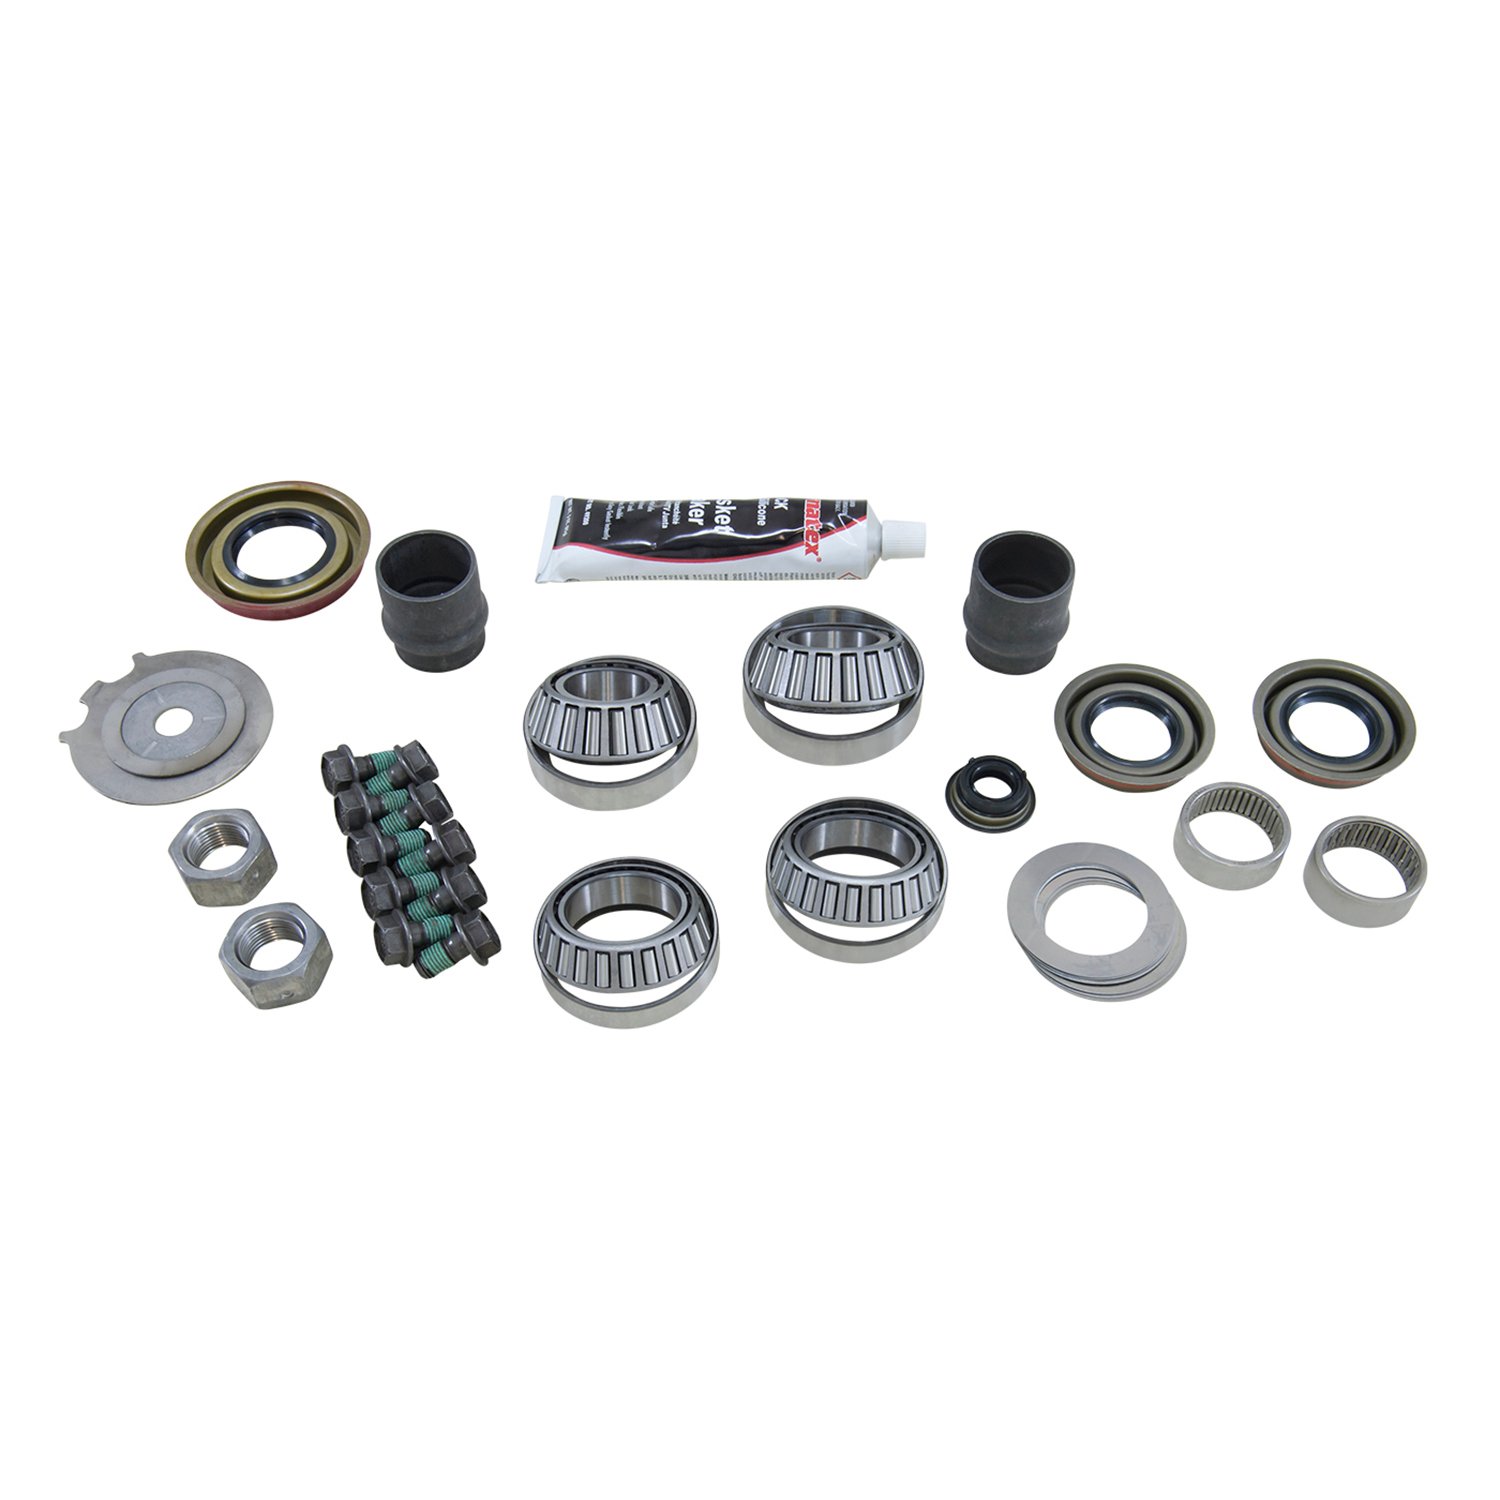 USA Standard 37141 Master Overhaul Kit, For The 1998 & Up GM 7.2 in. Ifs Awd